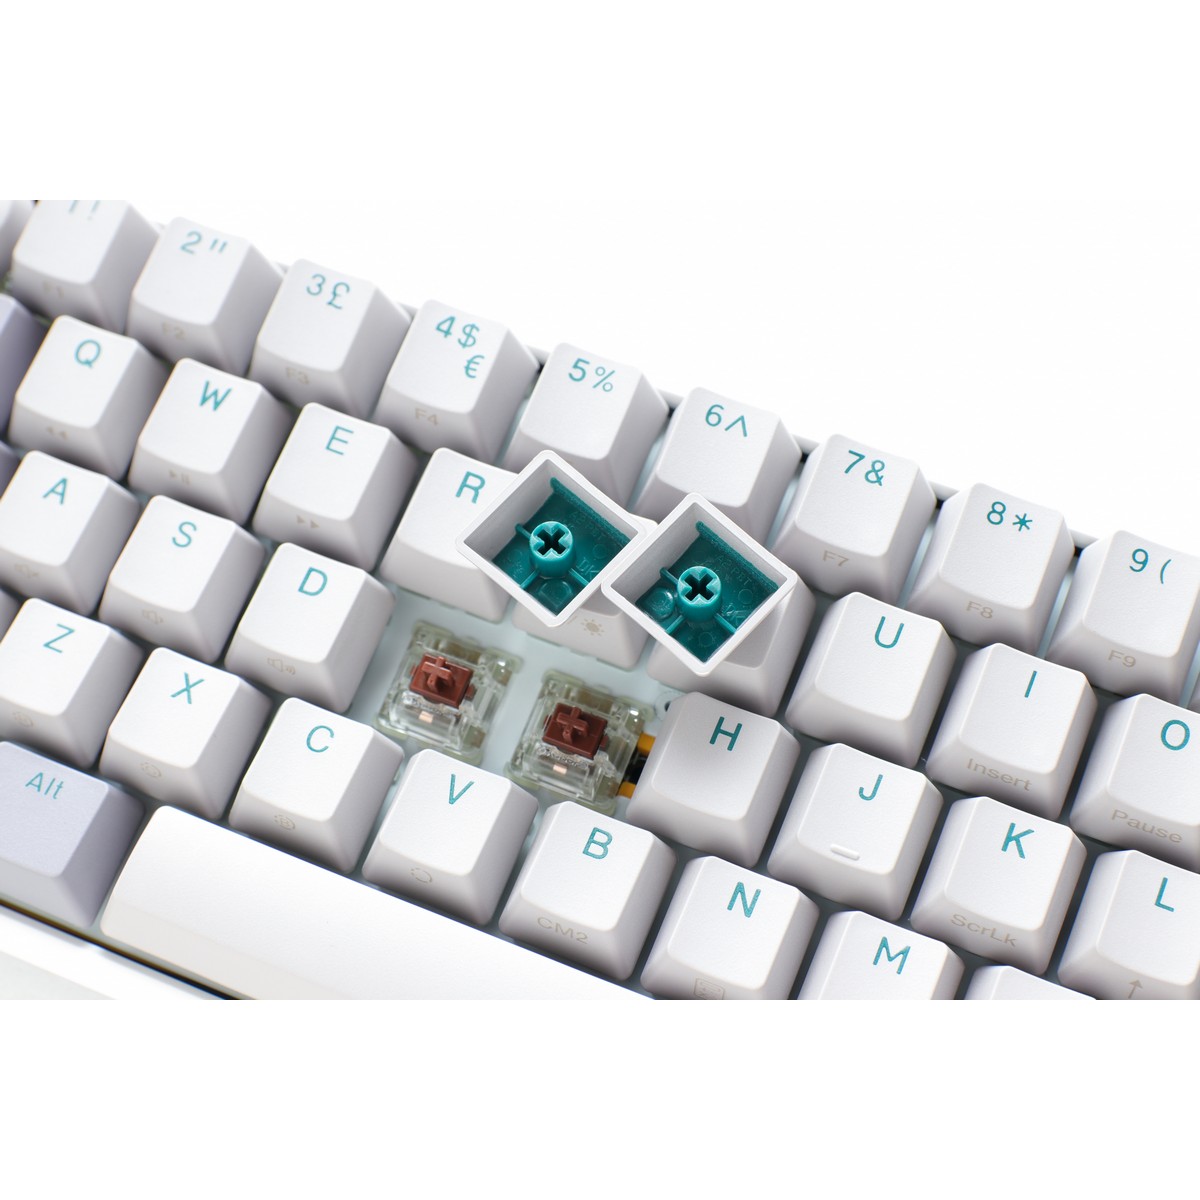 Ducky - Ducky One 3 Mist SF 65% USB RGB Mechanical Gaming Keyboard Cherry MX Red Switch - UK Layout